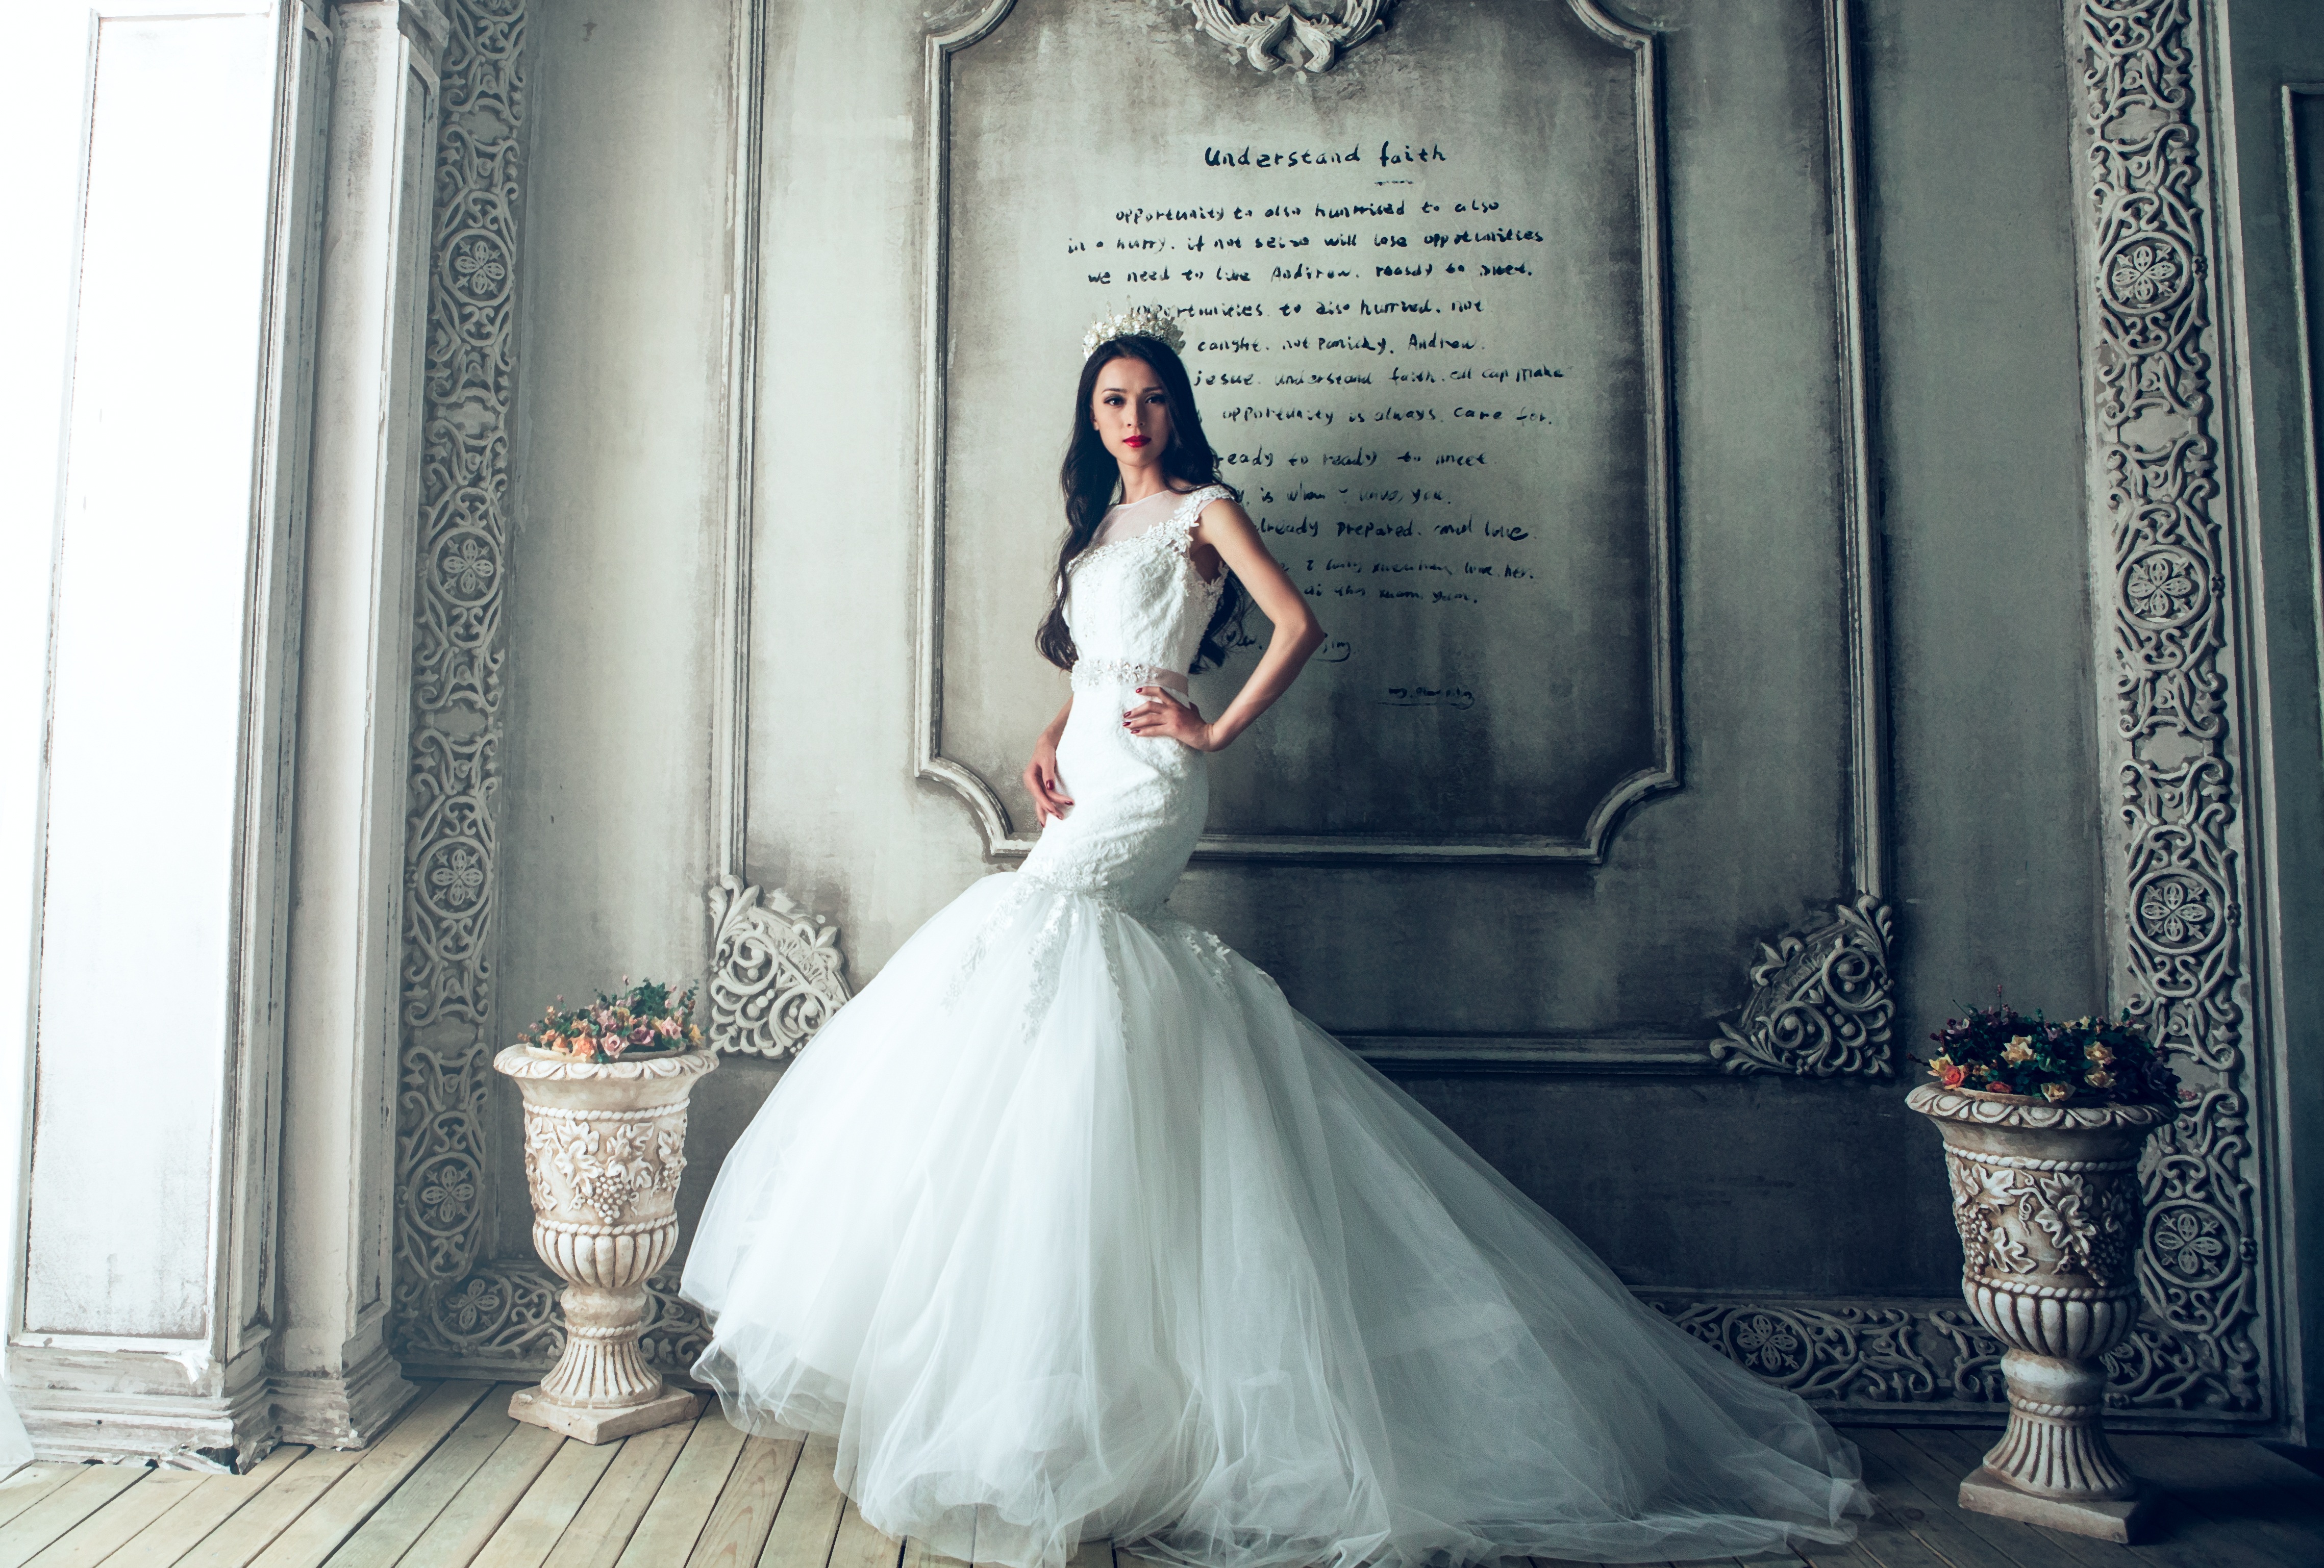 Free photo A girl in a wedding dress poses in a gloomy room